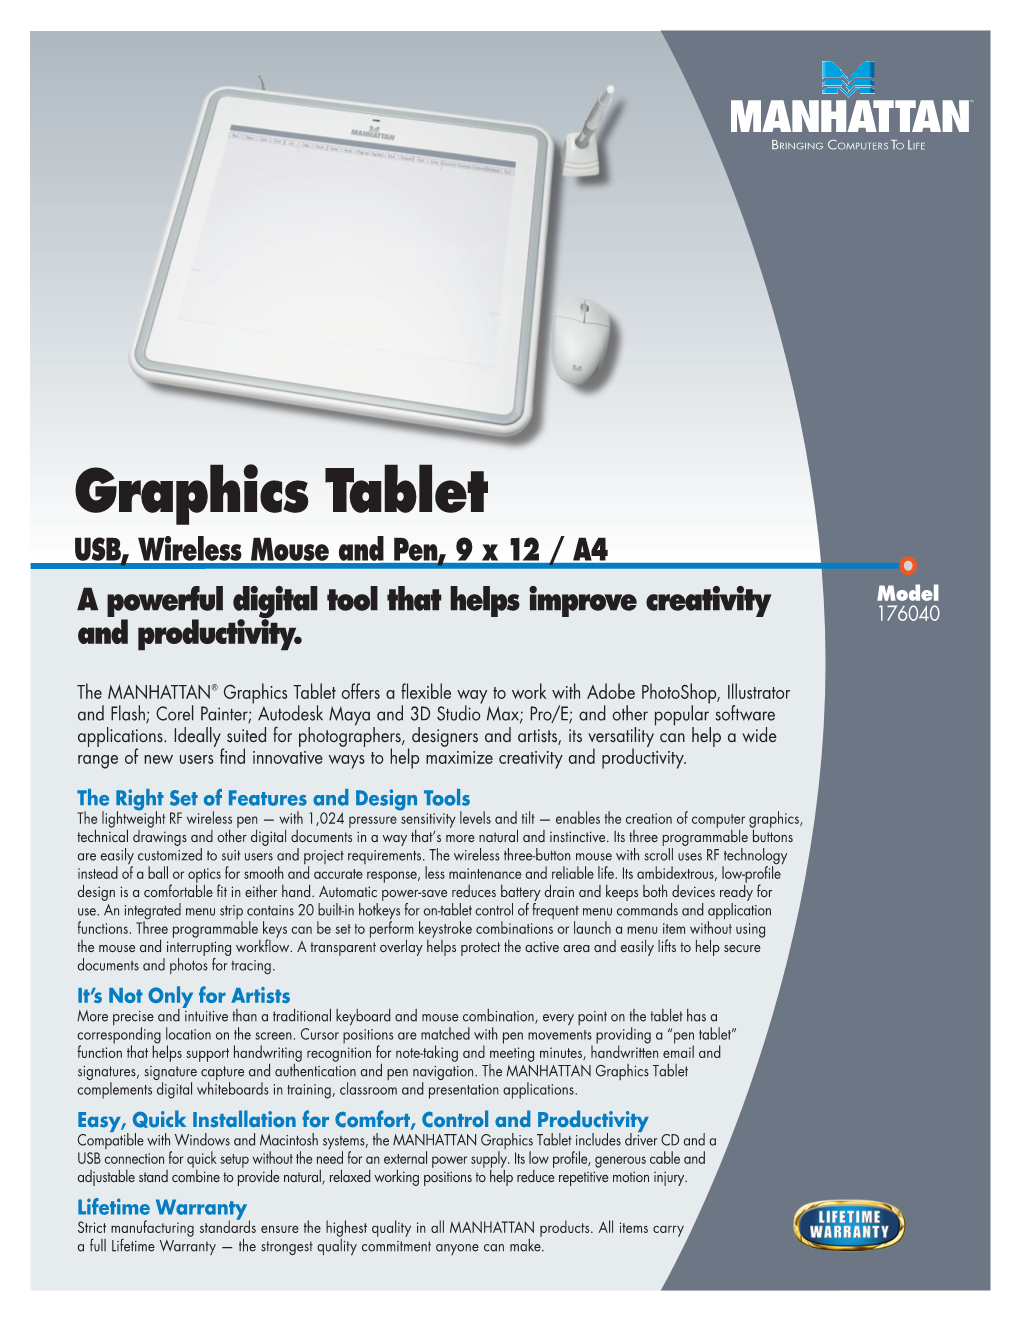 Graphics Tablet USB, Wireless Mouse and Pen, 9 X 12 / A4 Model a Powerful Digital Tool That Helps Improve Creativity 176040 and Productivity